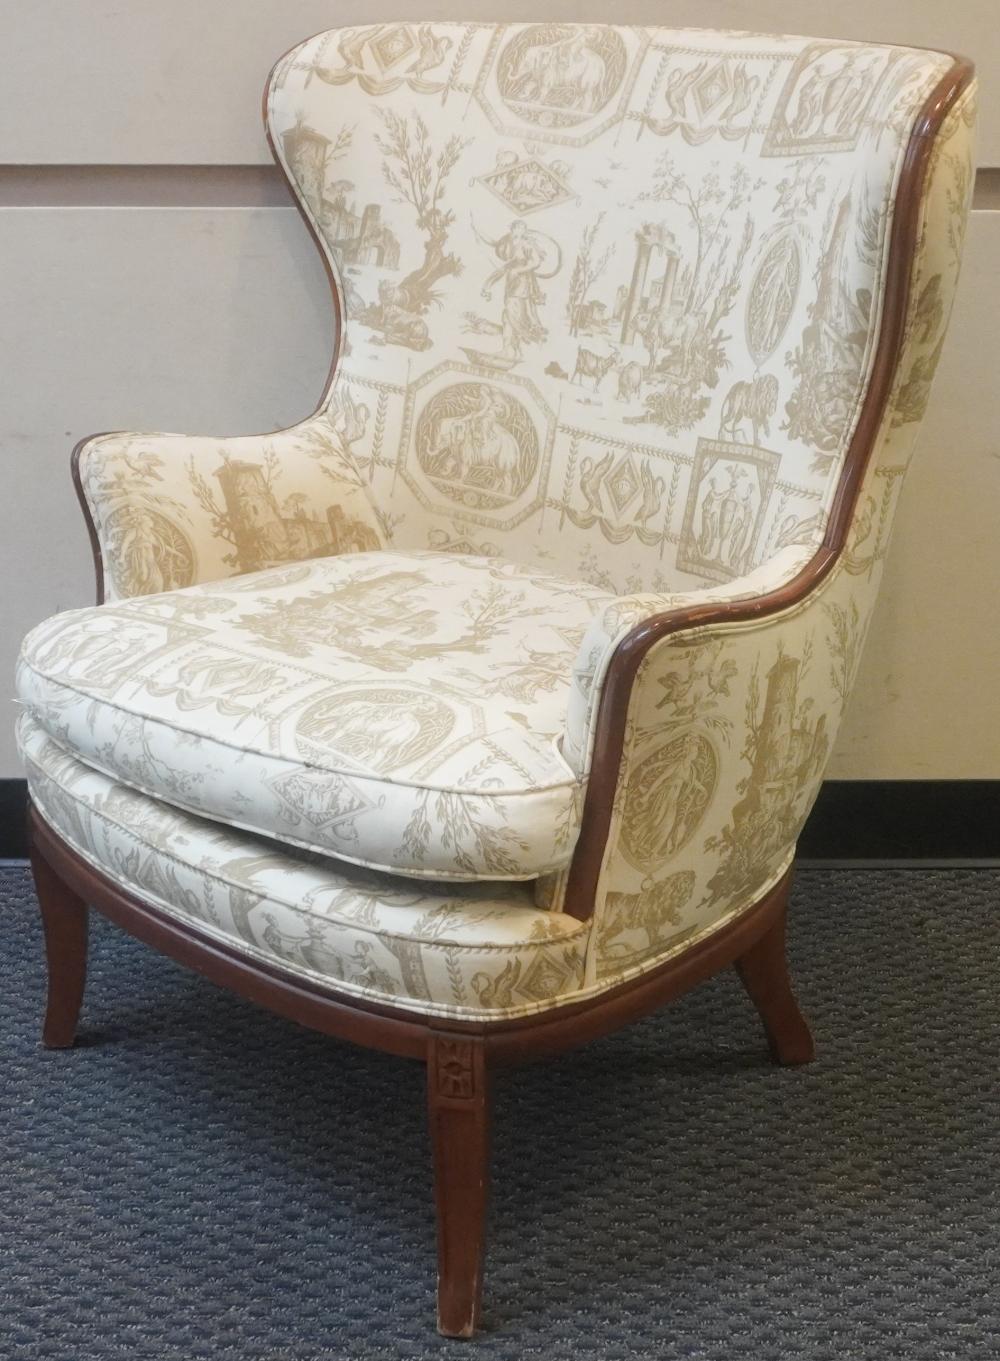 NEOCLASSICAL STYLE UPHOLSTERED 2e590a